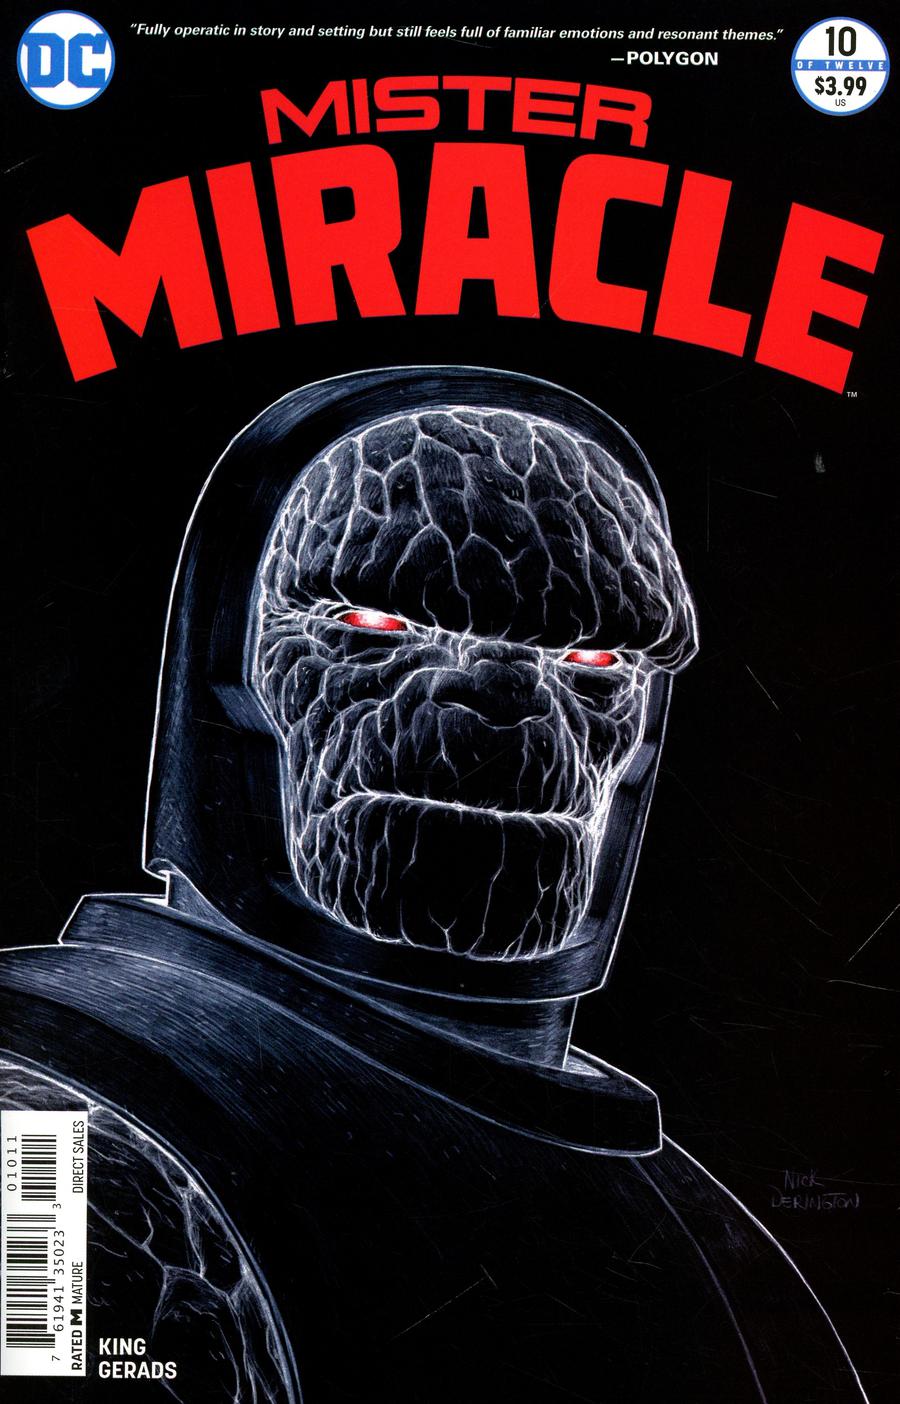 Mister Miracle Vol 4 #10 Cover A Regular Nick Derington Cover